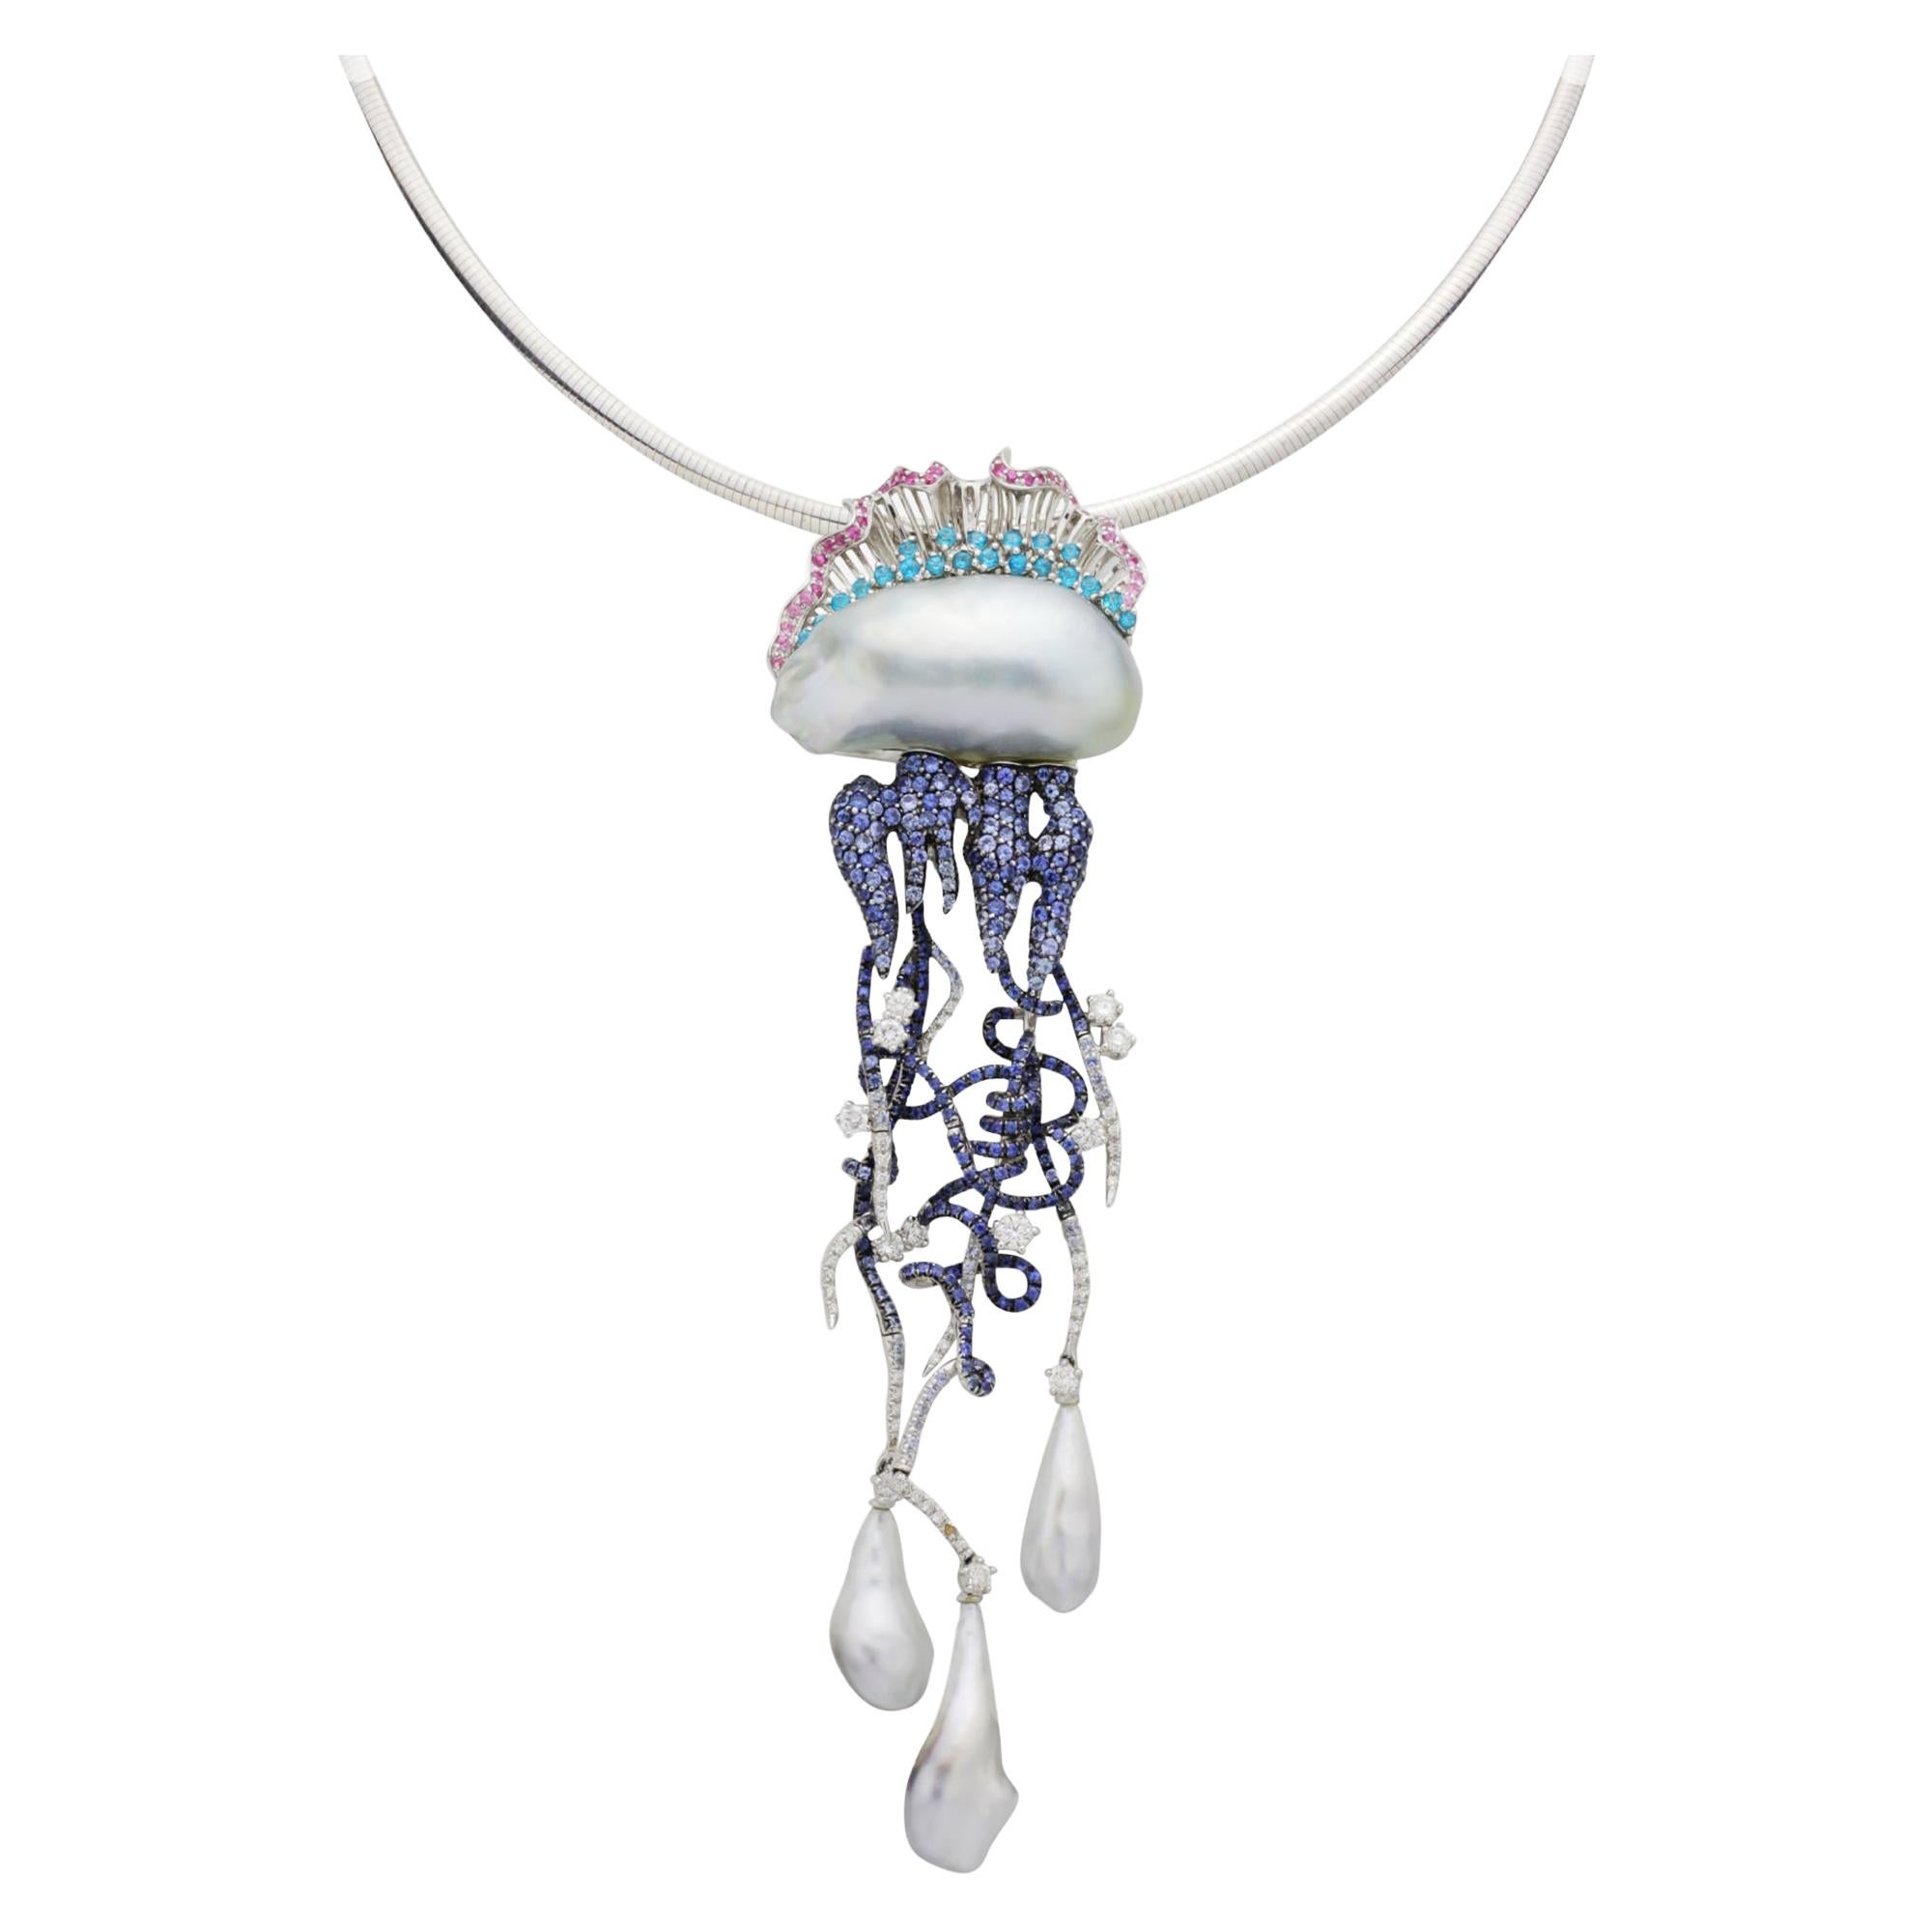 ‘Jellyfish’ Brooch Necklace by Alessio Boschi for Autore For Sale